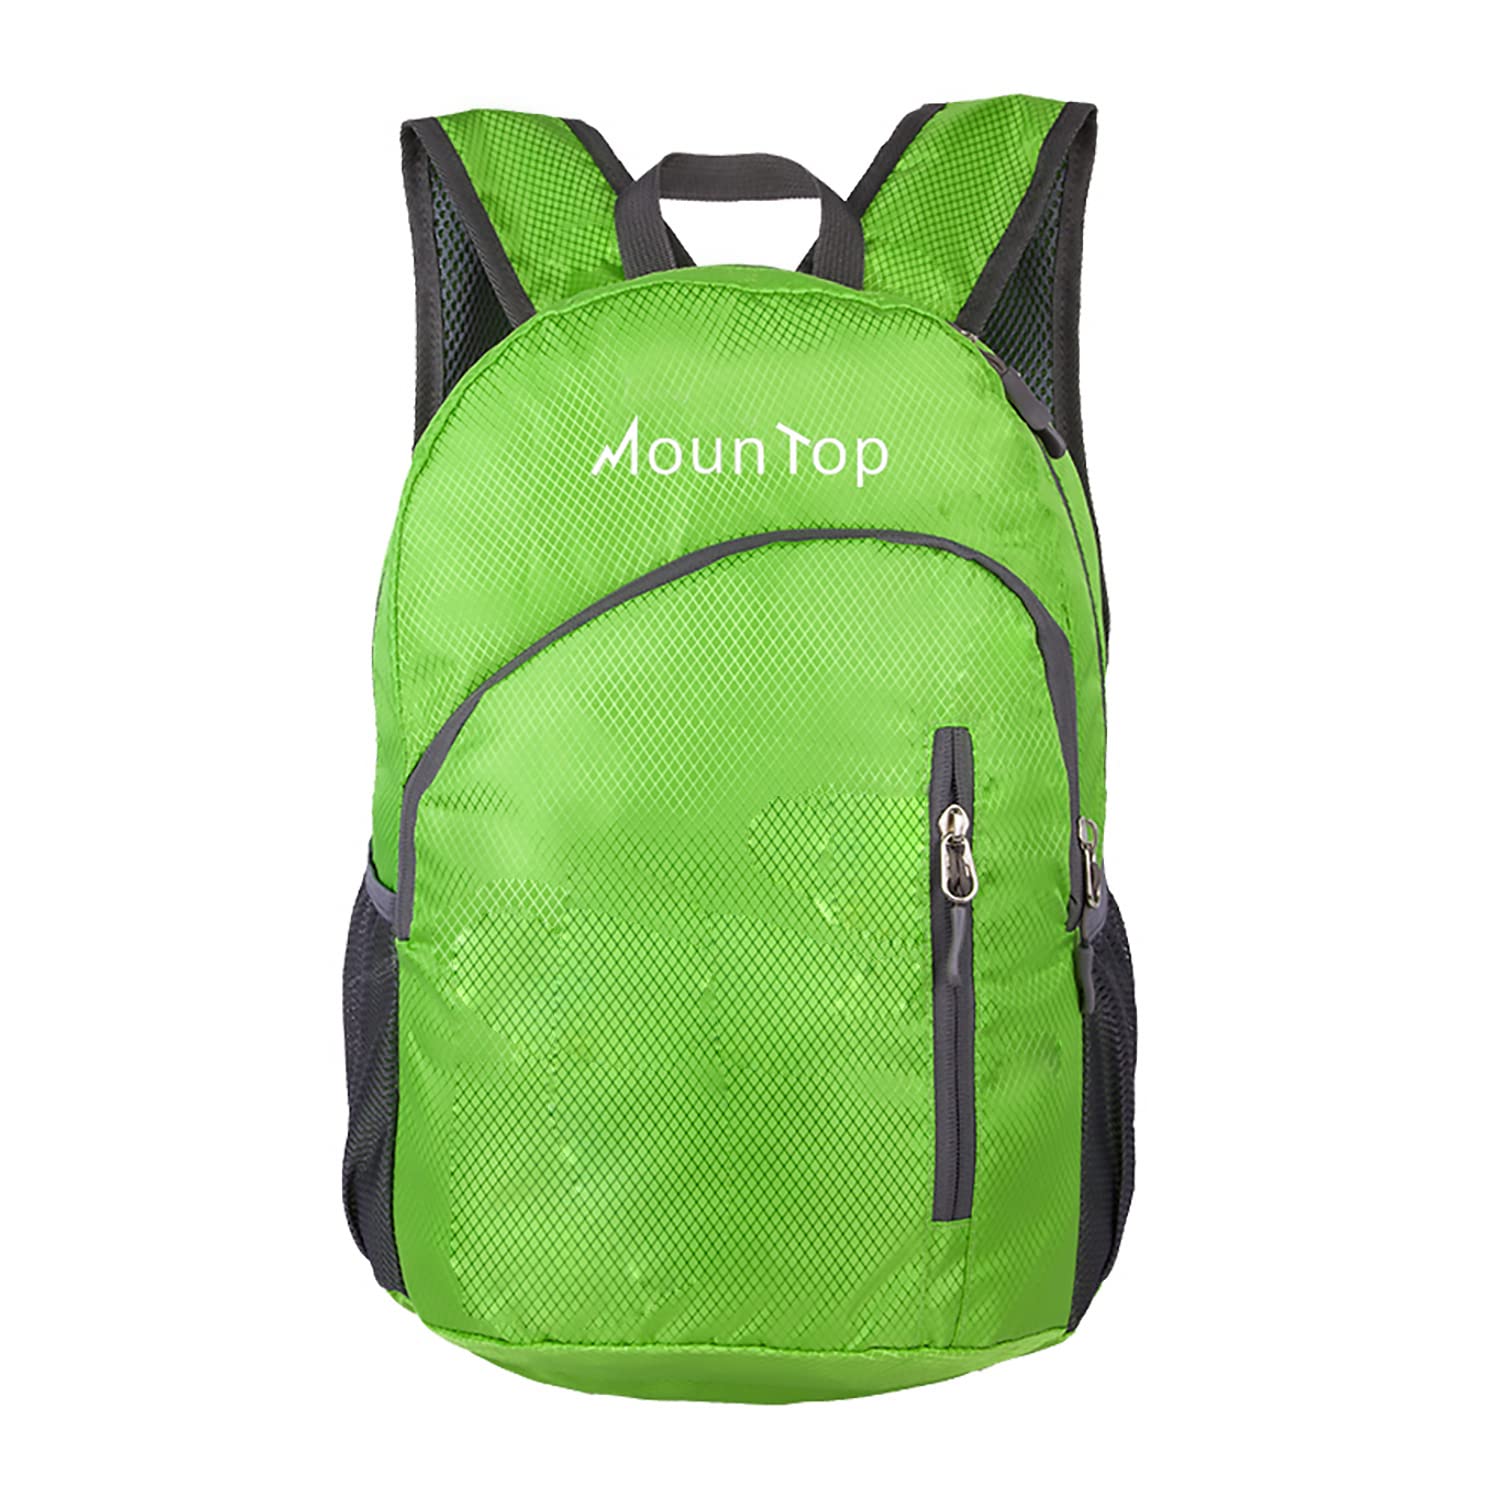 Mountop Outdoor Lightweight Foldable Water Resistant Backpack for Travel Hiking Riding